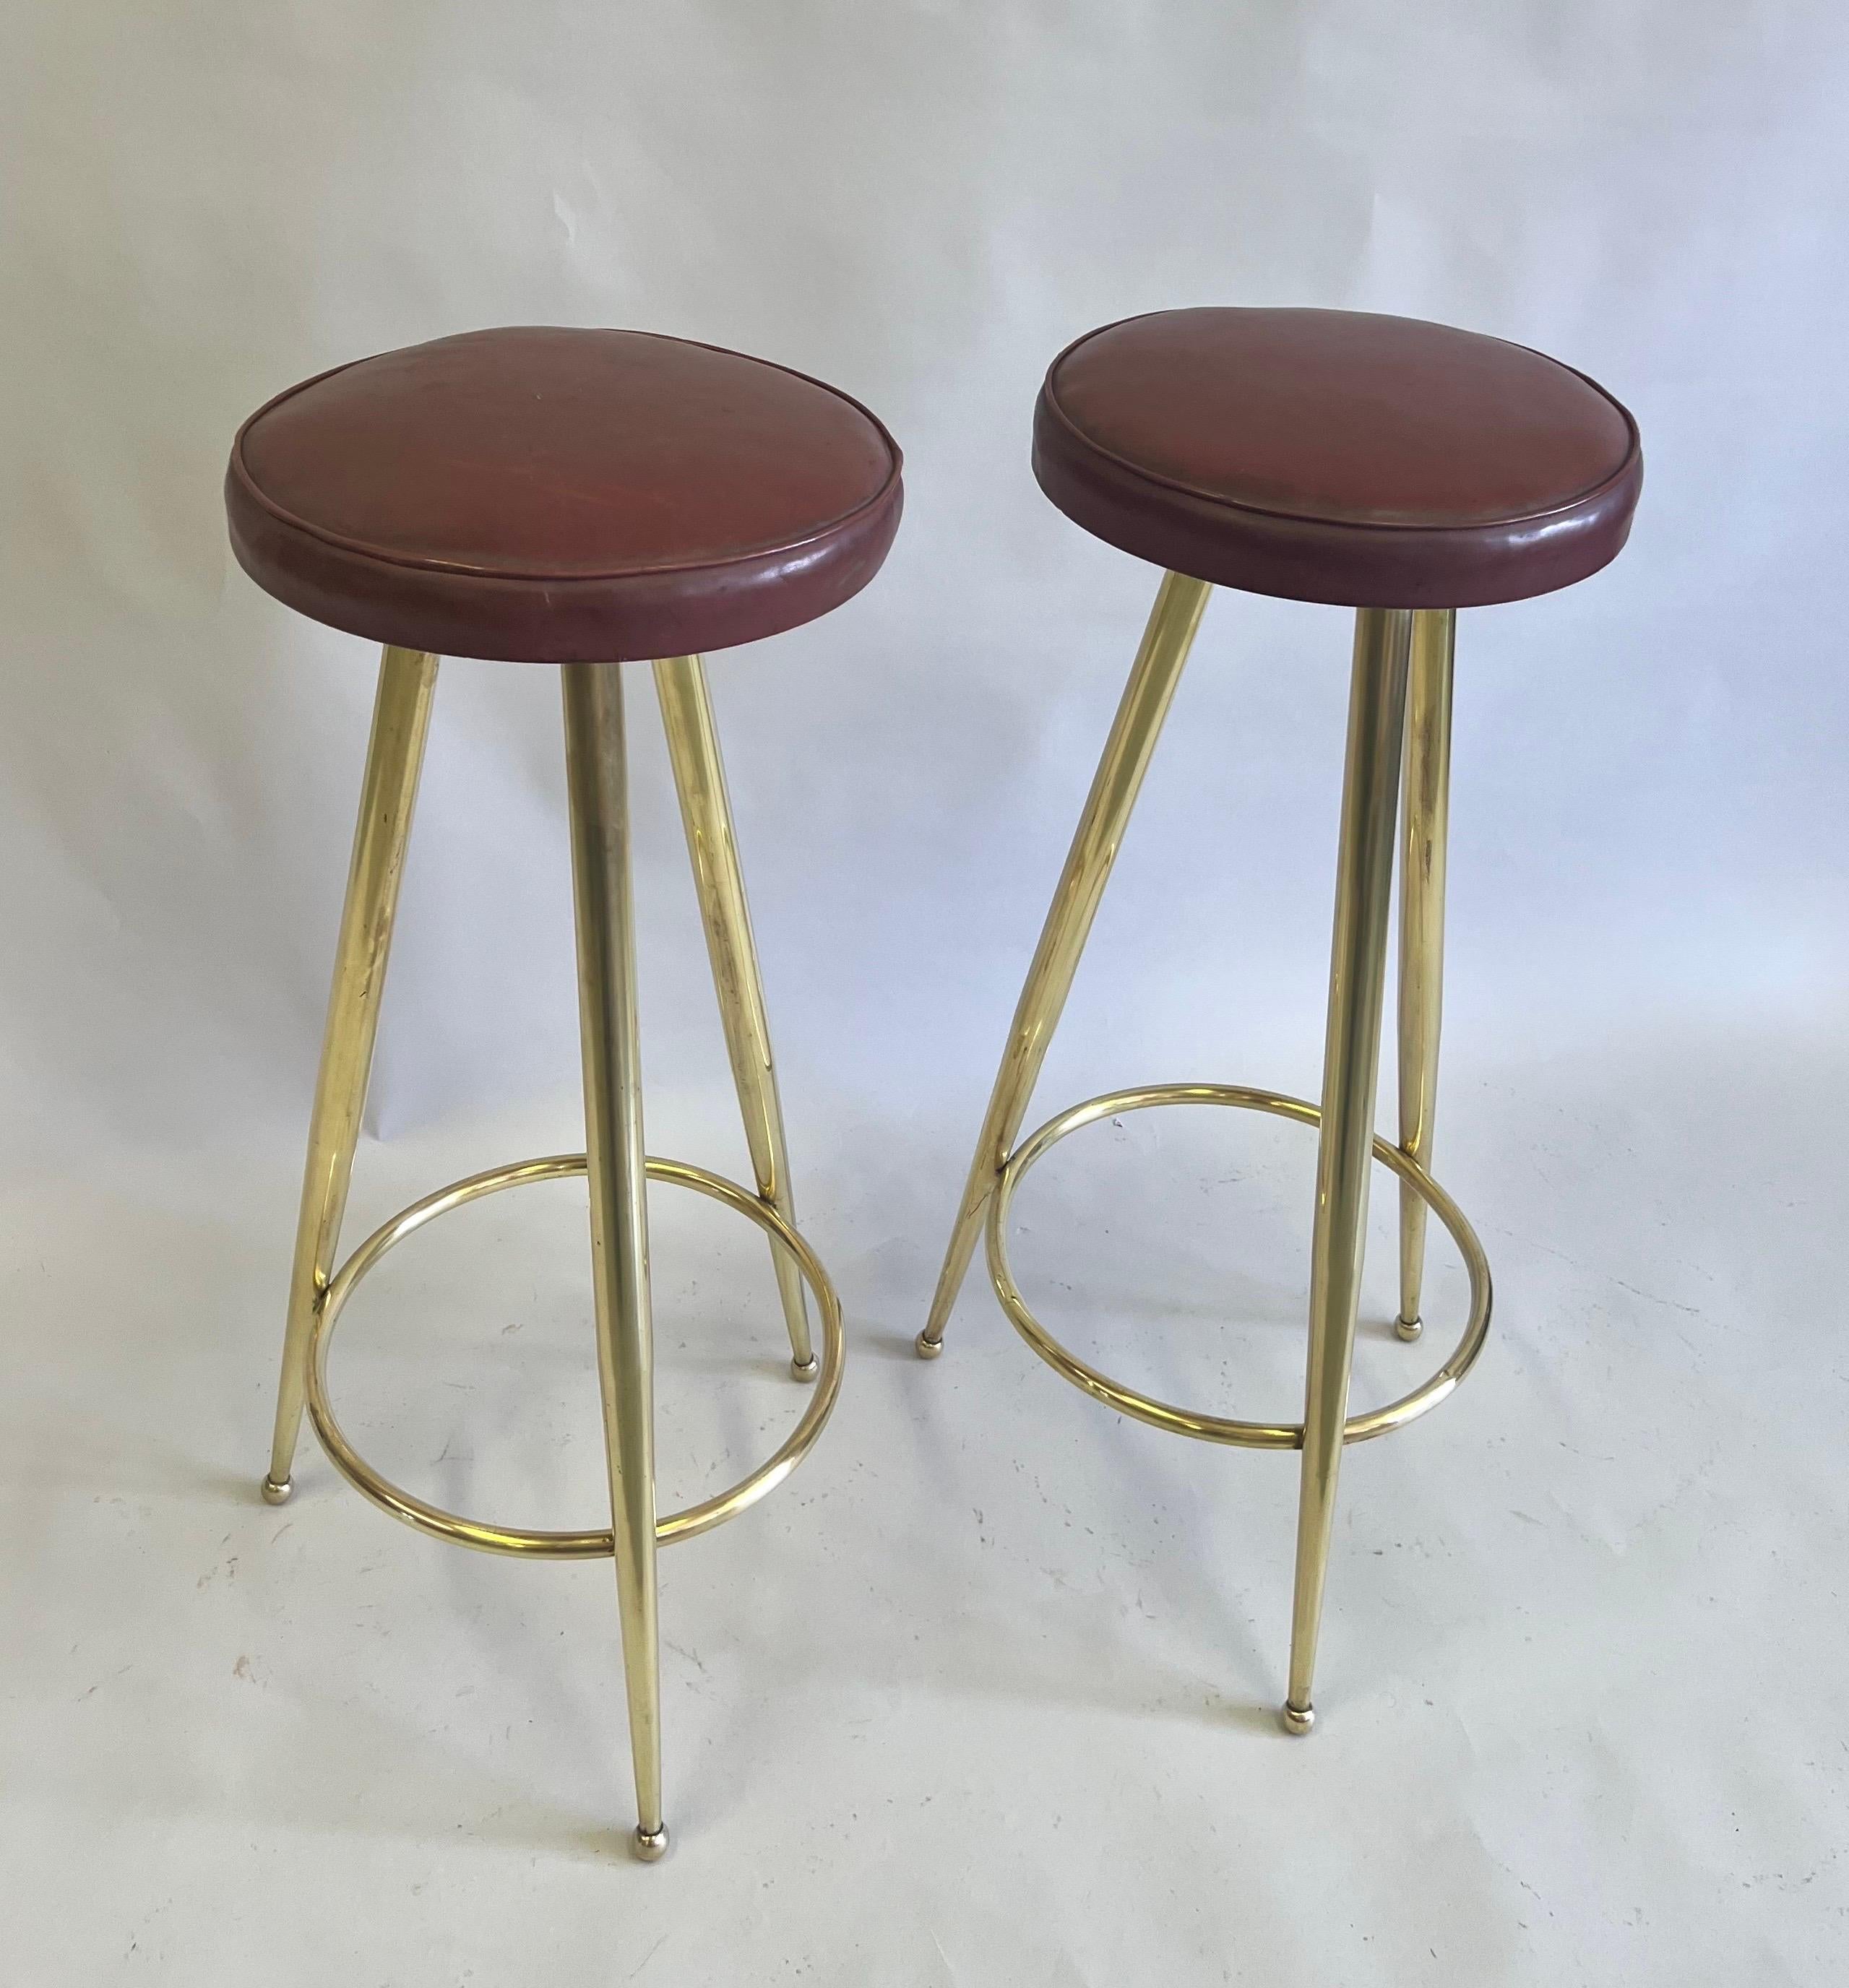 Hand-Crafted Pair of Italian Mid-Century Modern Brass Bar Stools by Gio Ponti For Sale